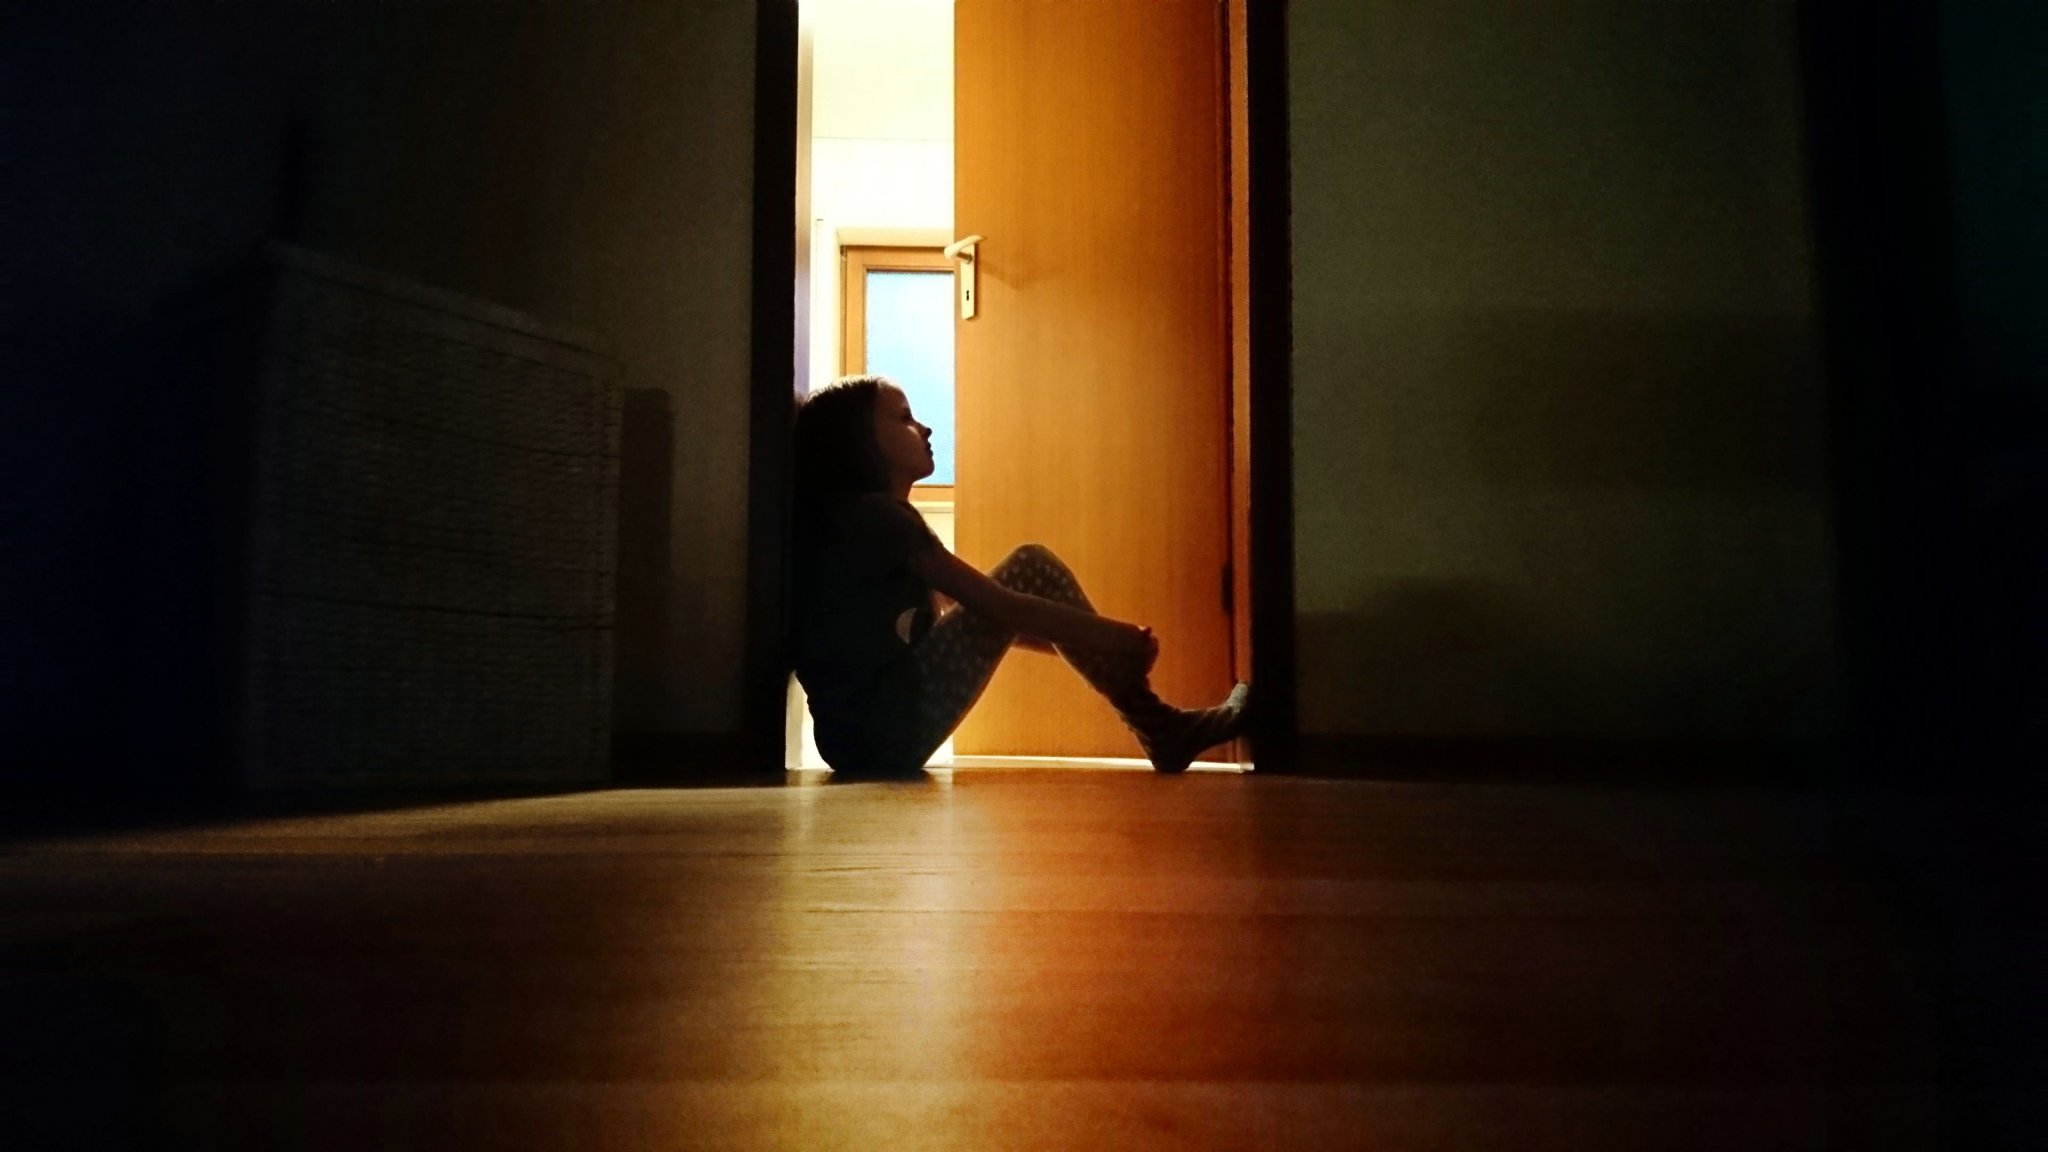 Anxiety and Depression Most Severe in Kids Right Now, Report Shows